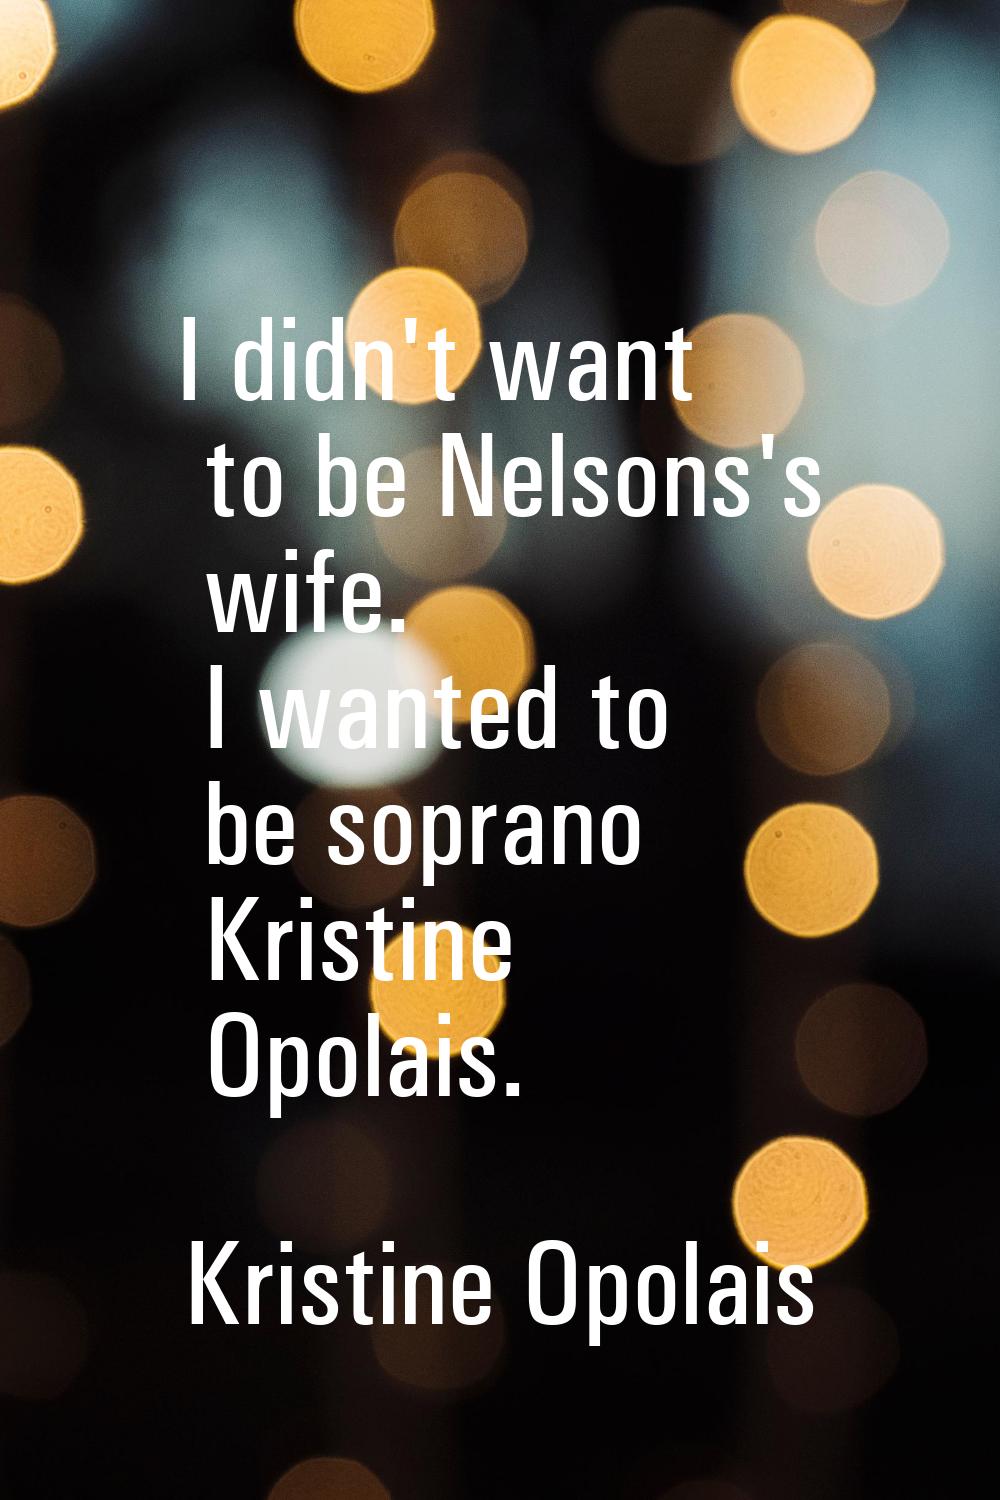 I didn't want to be Nelsons's wife. I wanted to be soprano Kristine Opolais.